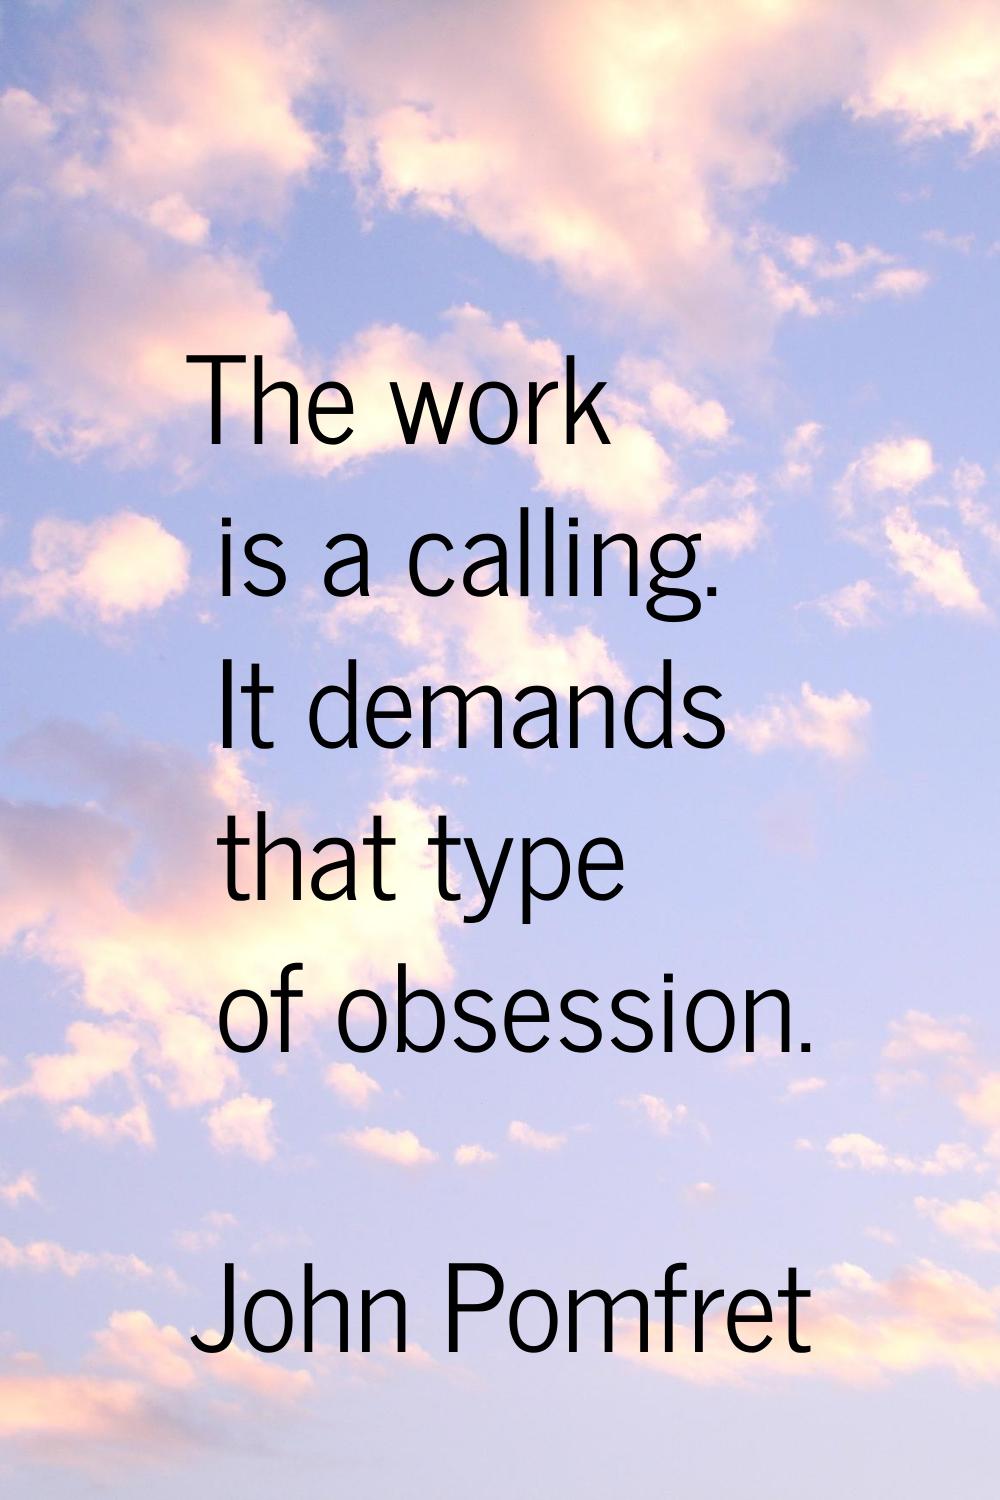 The work is a calling. It demands that type of obsession.